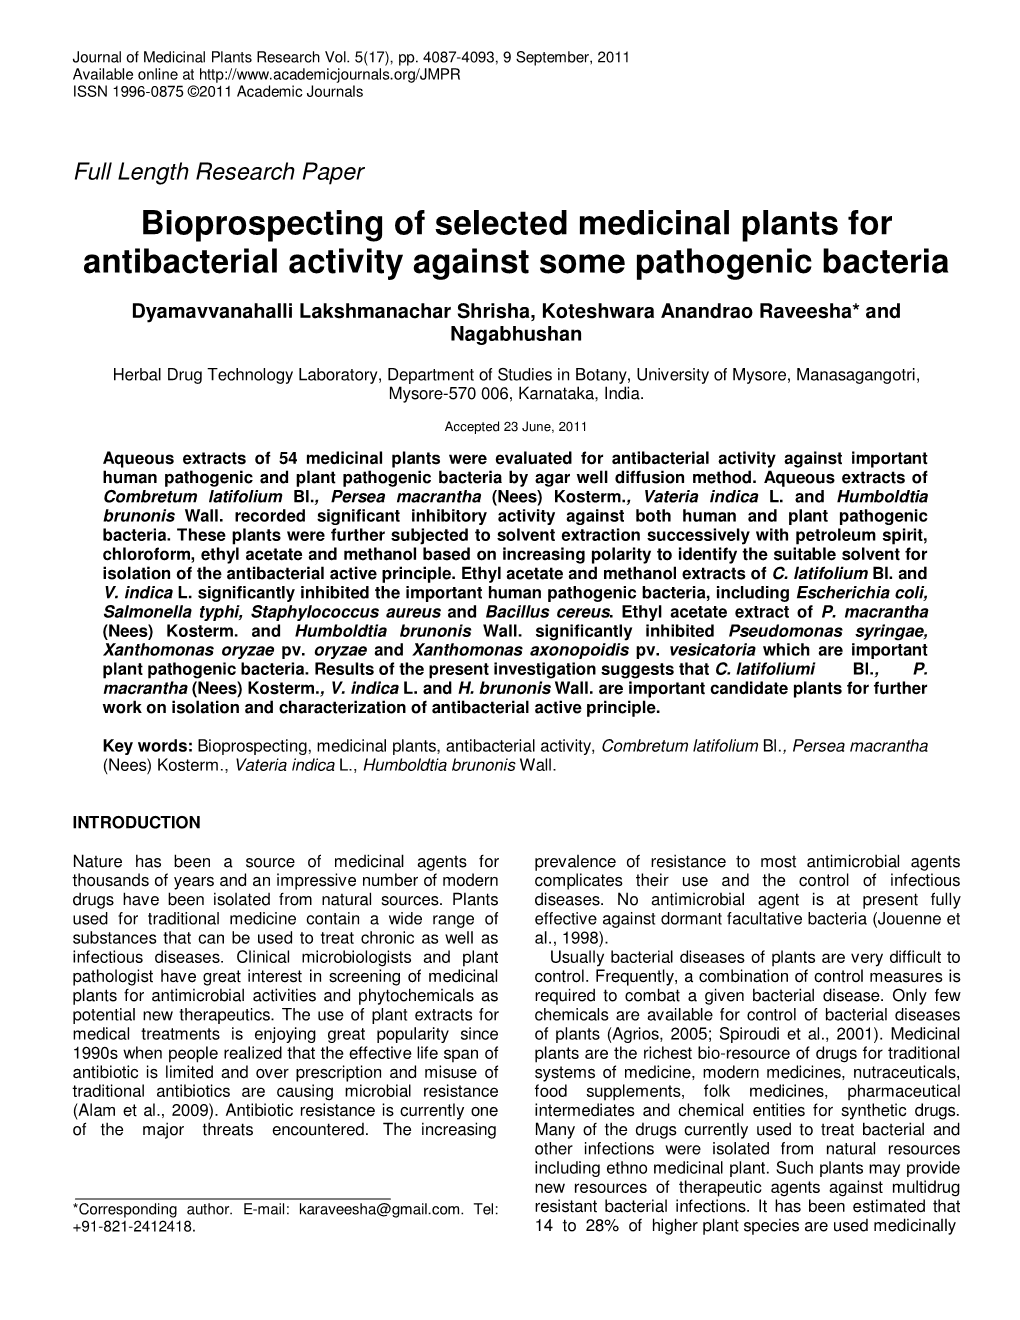 Bioprospecting of Selected Medicinal Plants for Antibacterial Activity Against Some Pathogenic Bacteria